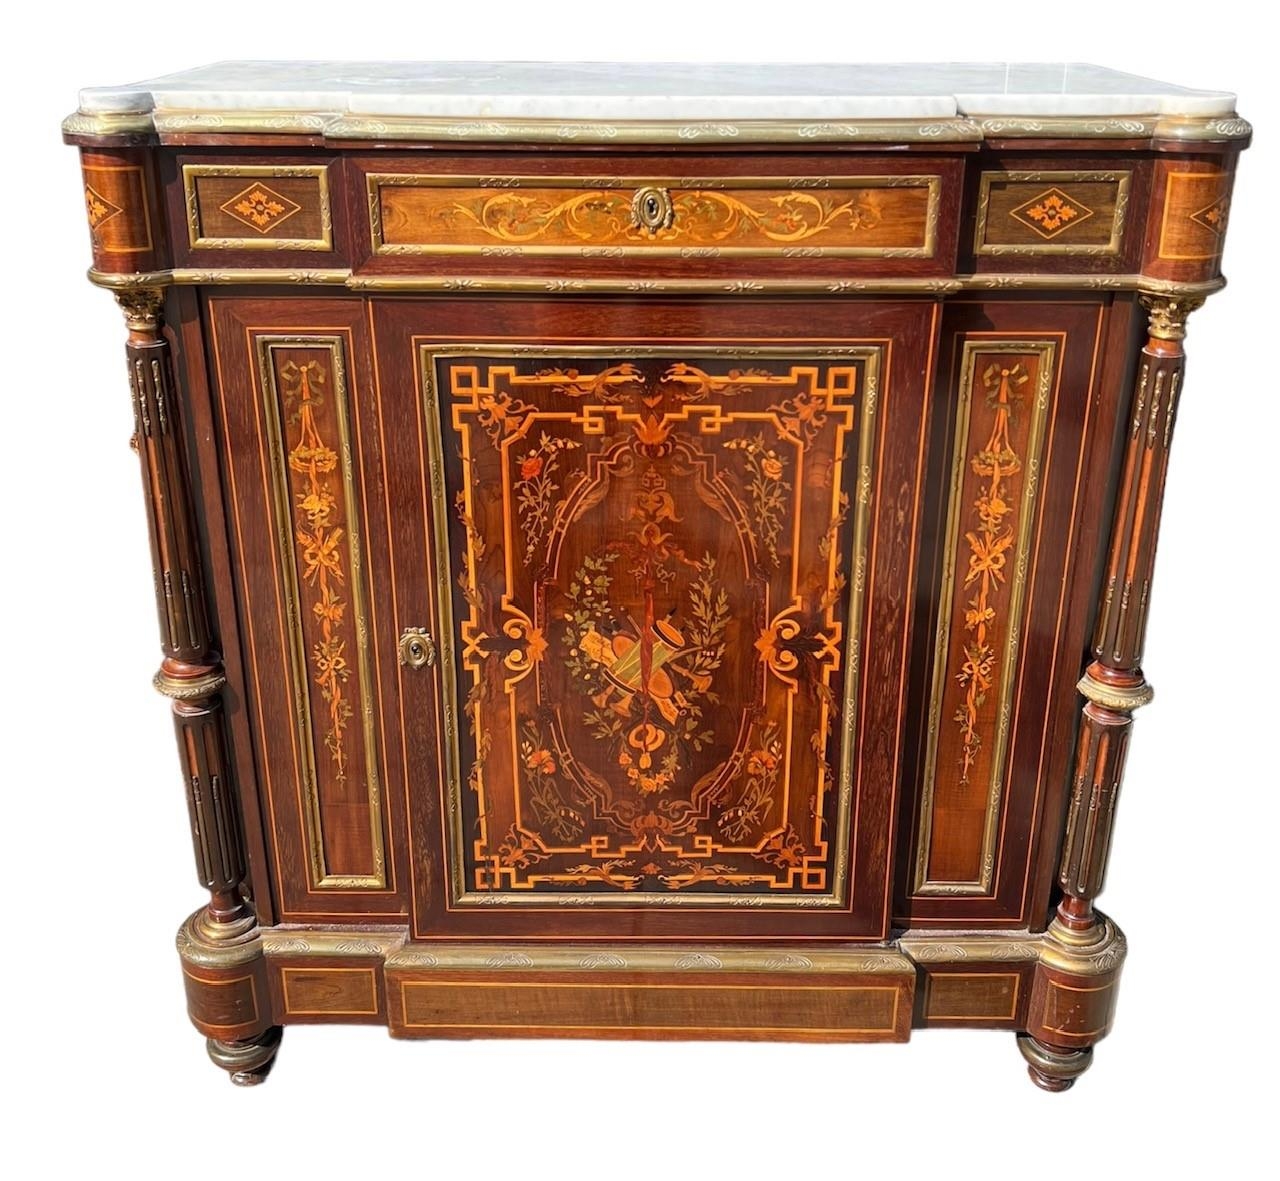 A 19TH CENTURY FRENCH LOUIS XVI DESIGN GILT METAL MOUNTED AND MARQUETRY PIER CABINET Marble top with - Image 4 of 4